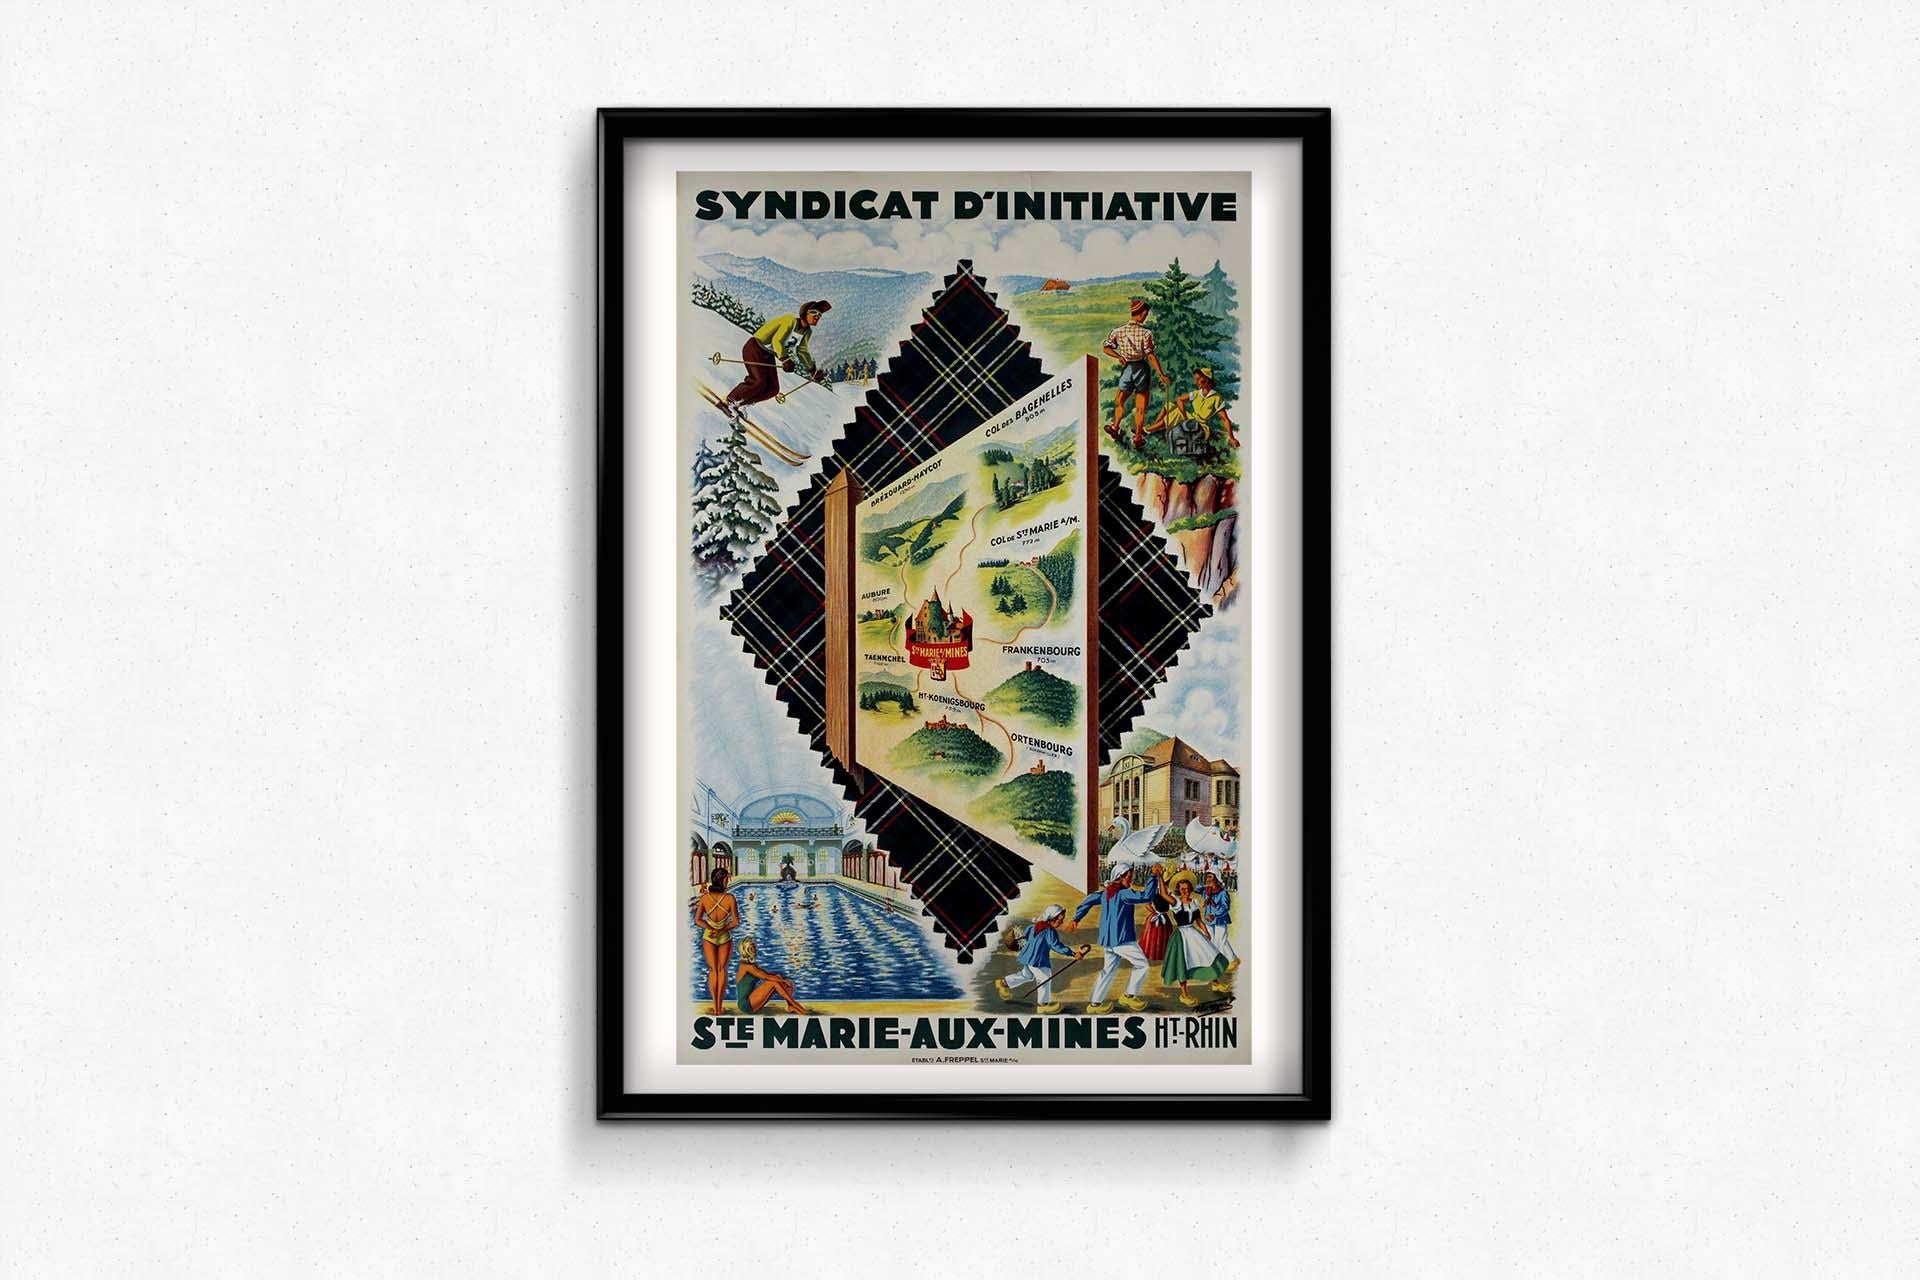 The circa 1930 original poster by A. Freppel promoting the Syndicat d'Initiative Sainte-Marie-aux-Mines offers a captivating glimpse into the charm and allure of this historic French town. Created during a period when travel posters were in vogue,